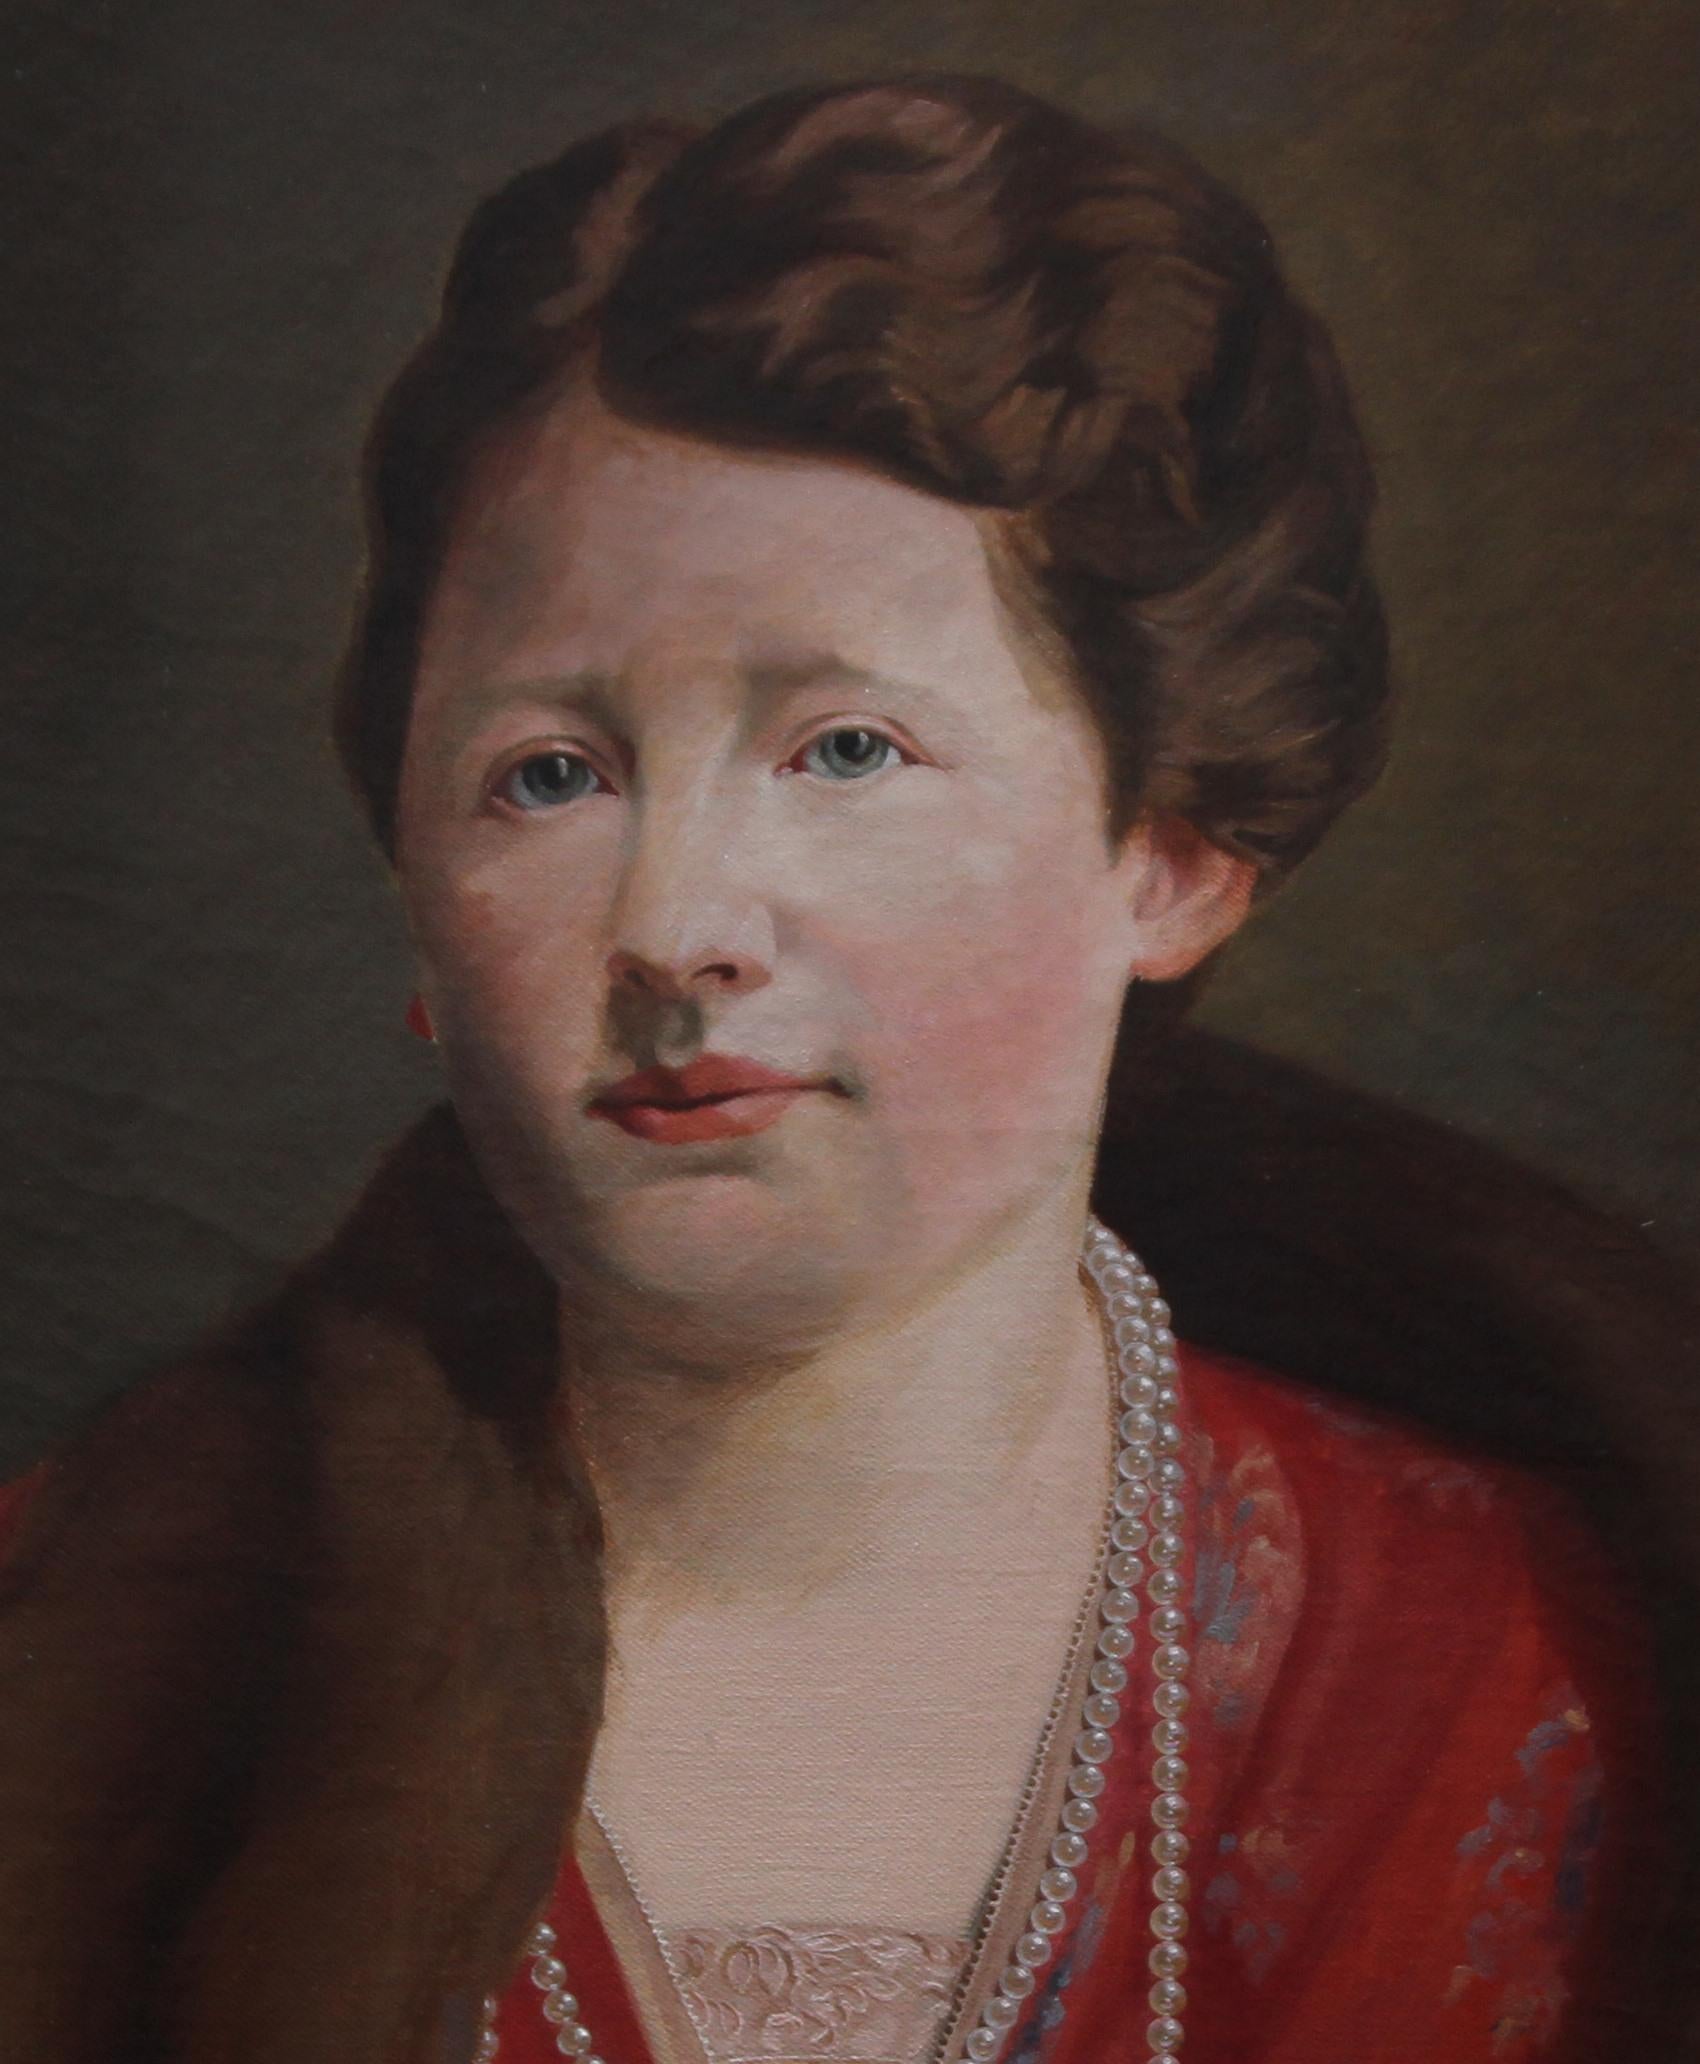 This lovely British Art Deco portrait oil painting is by noted artist James Robert Granville Exley and provenance is by family descent. The sitter is Elizabeth Exley, possibly his wife. Painted circa 1935 it is a half length portrait of Elizabeth in